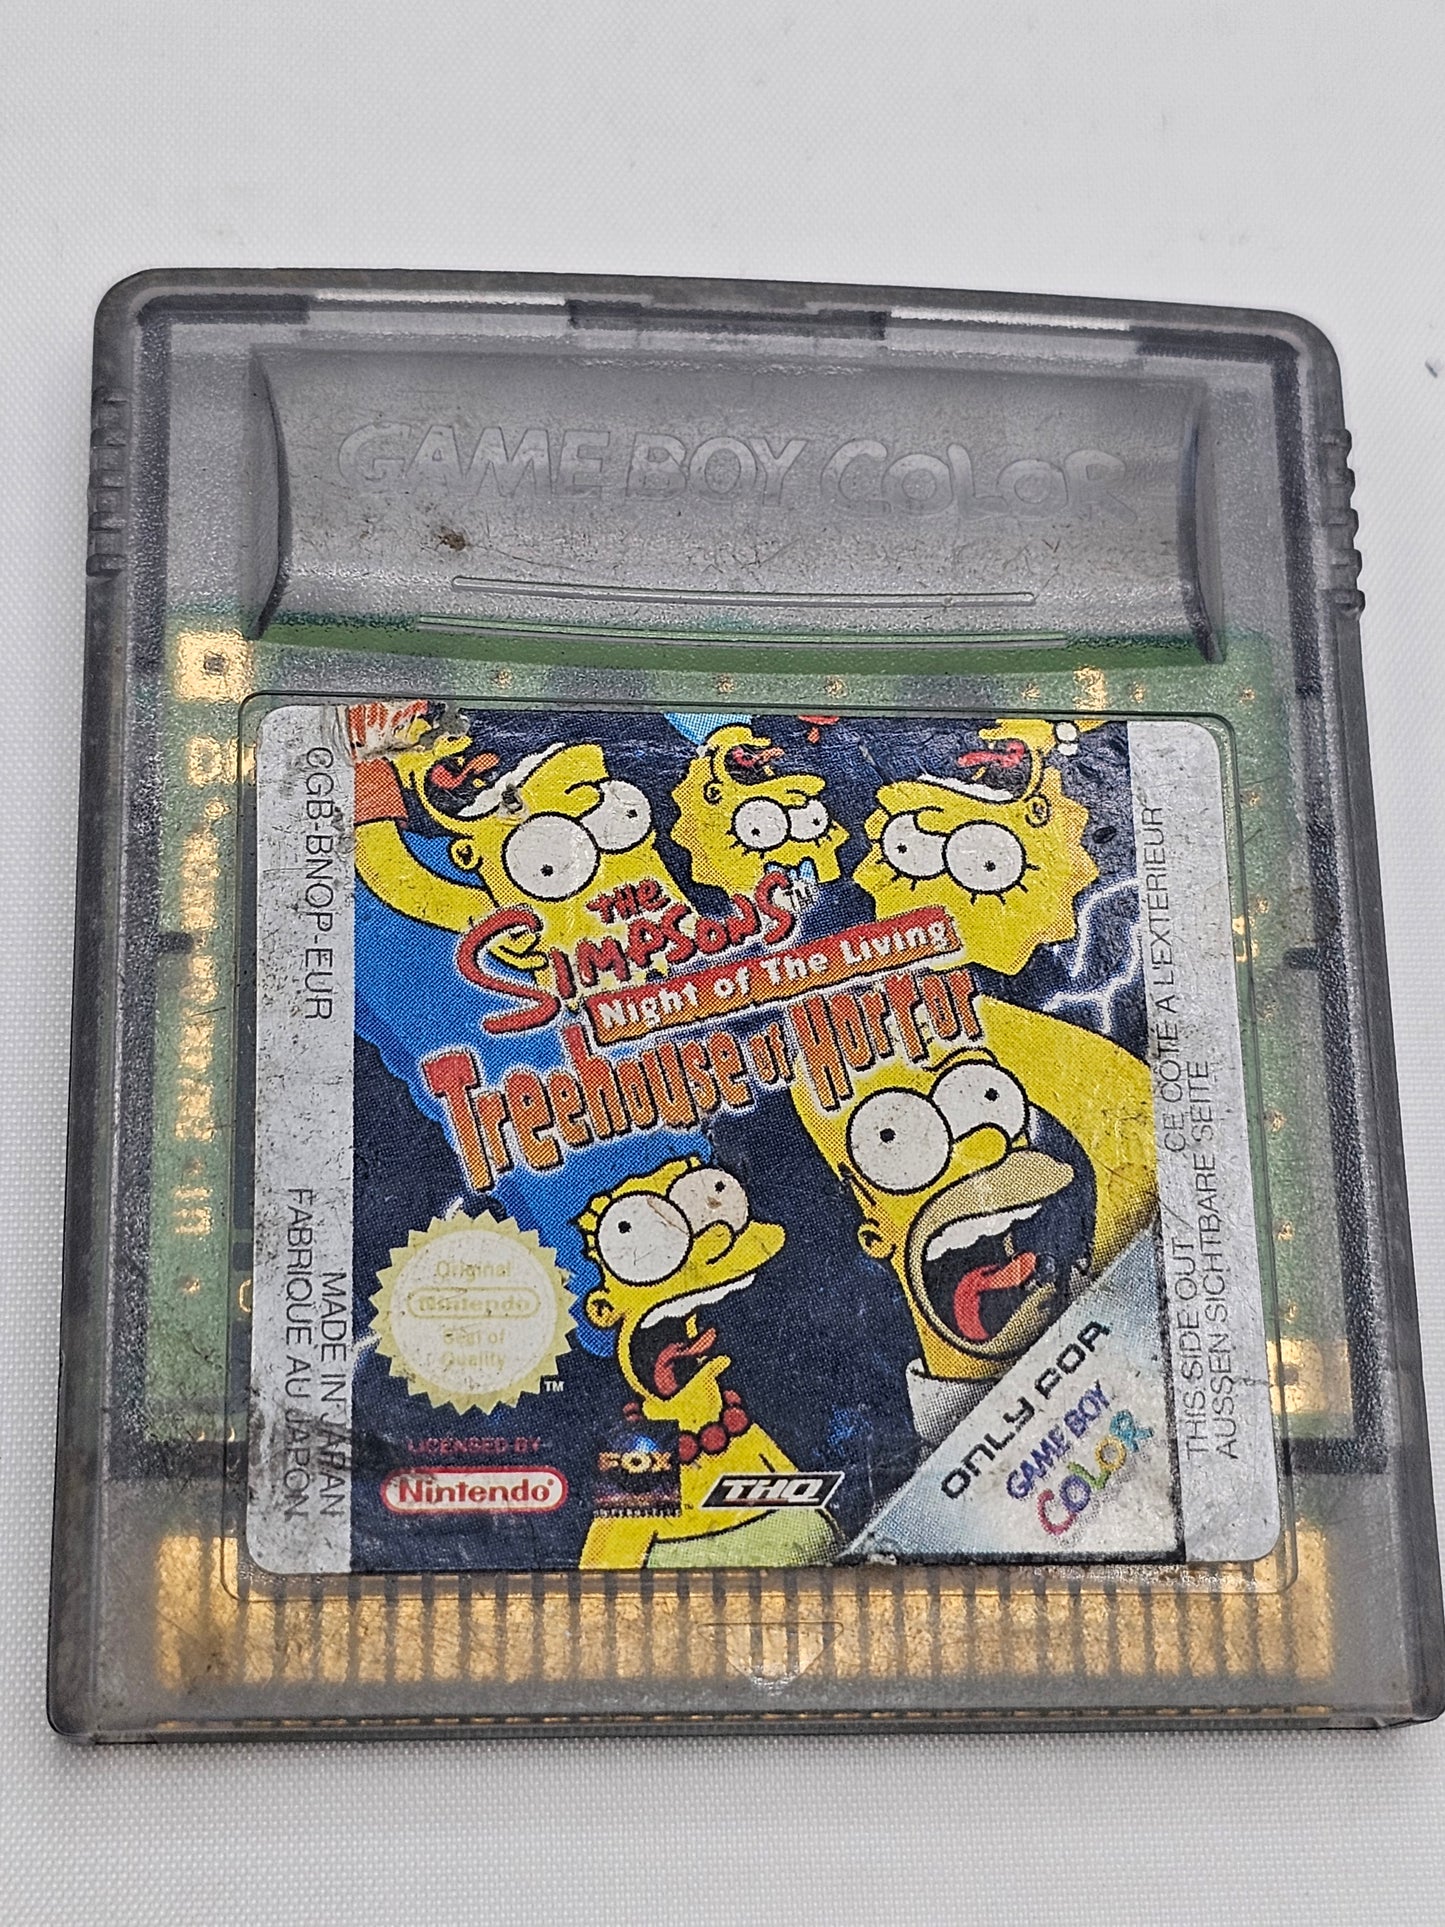 Gameboy Color The Simpsons night of the living Teehouse of terror